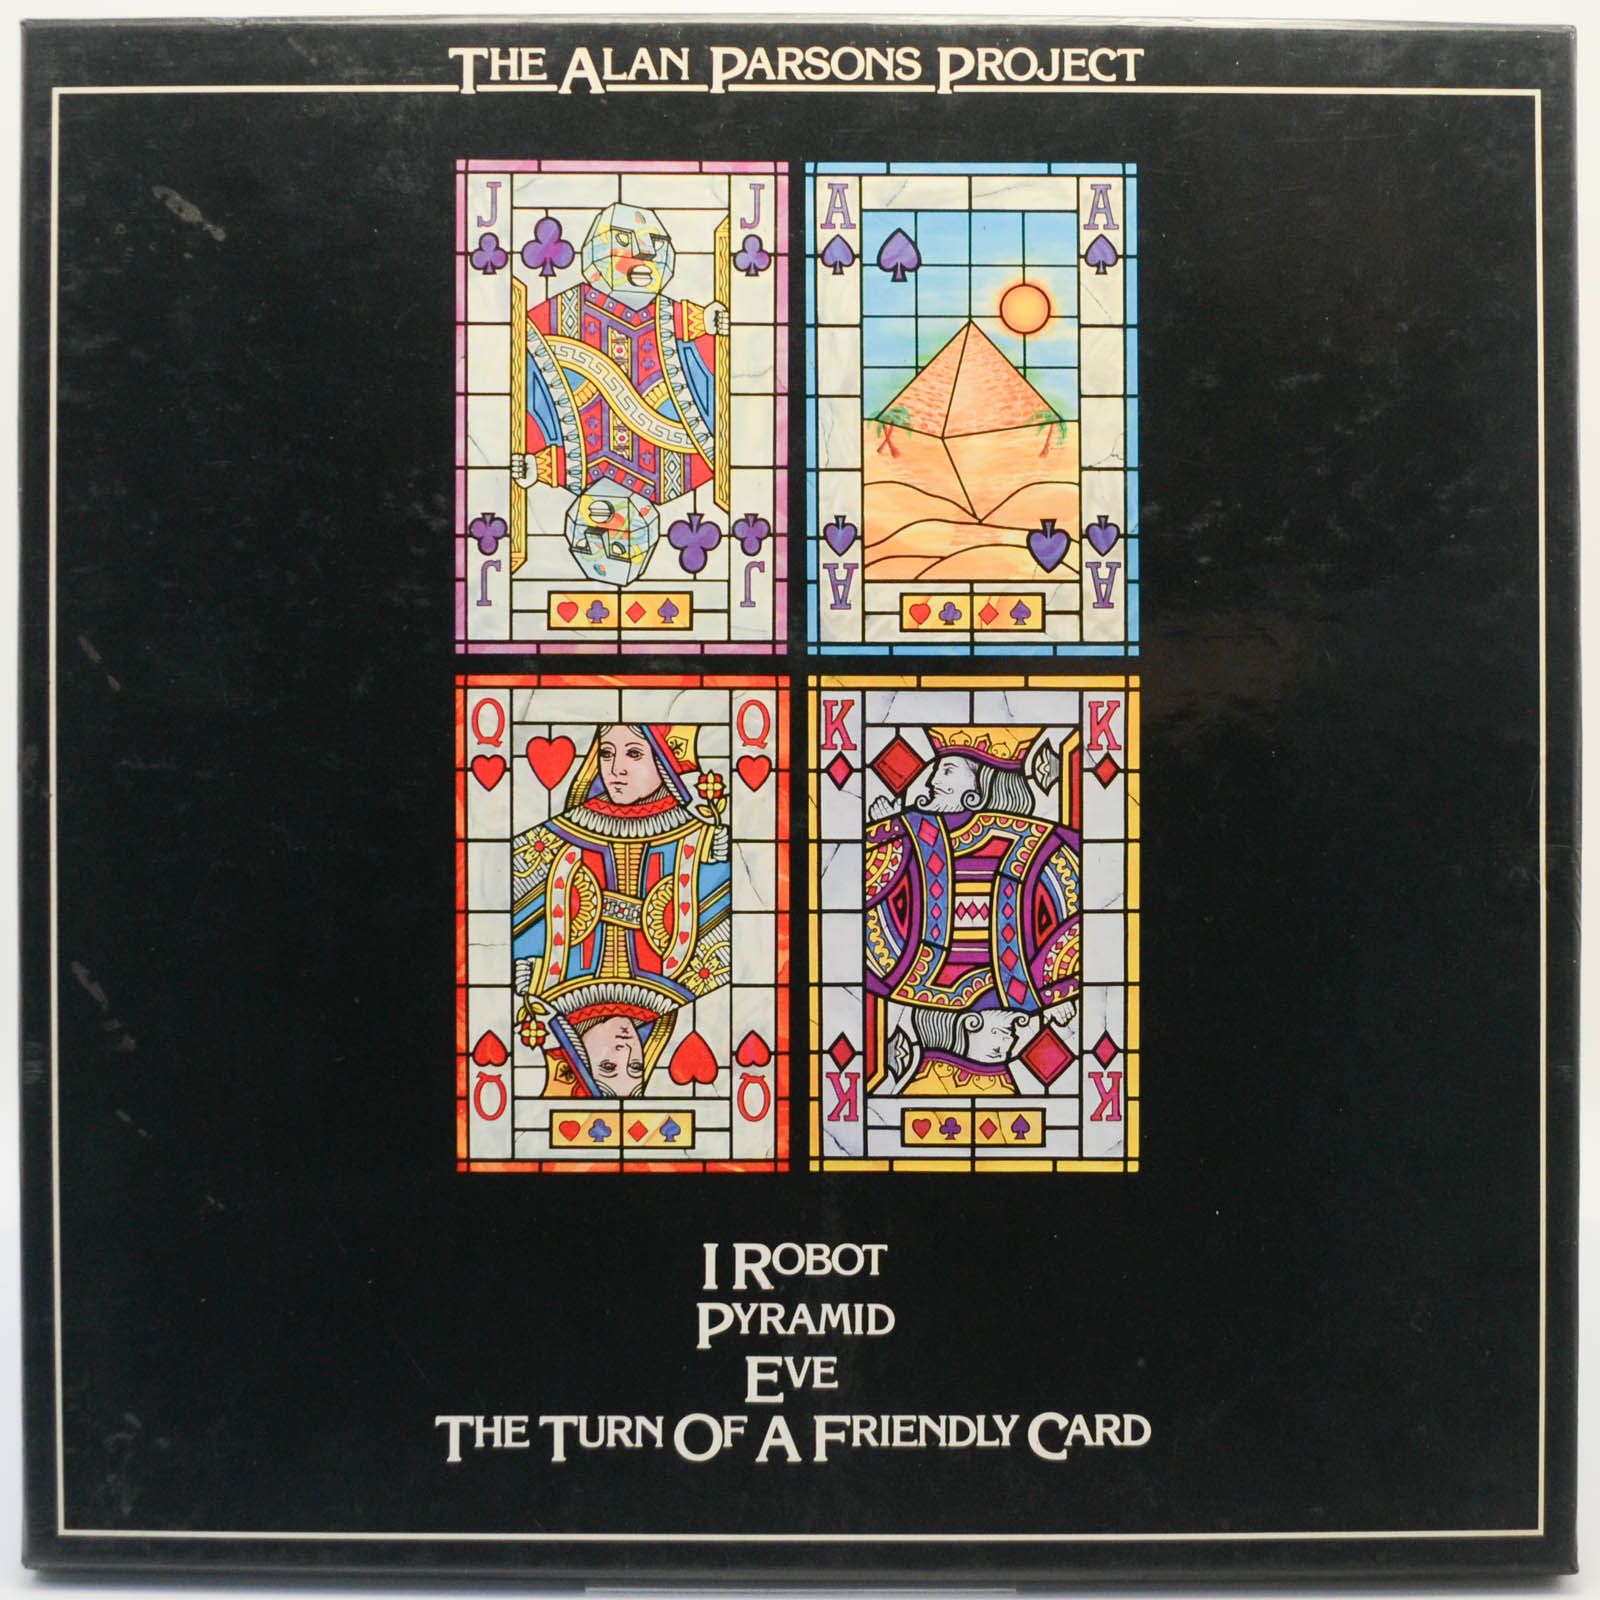 Alan Parsons Project — I Robot / Pyramid / Eve / The Turn Of A Friendly Card (4LP, Box-set), 1981